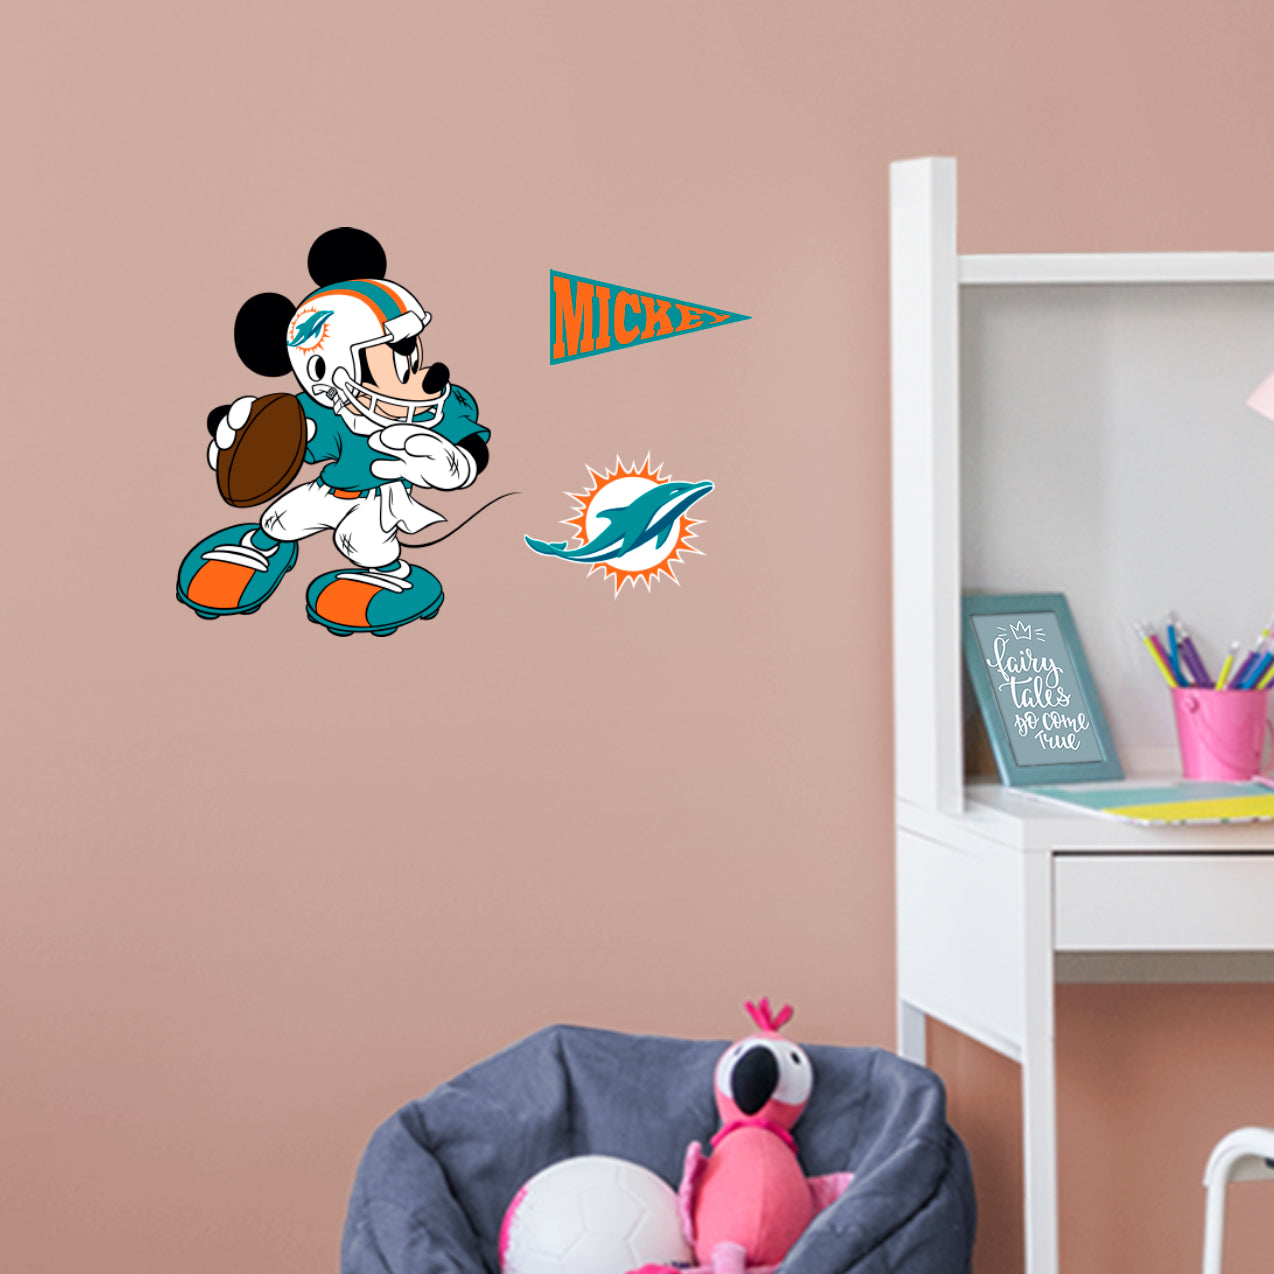 Miami Dolphins: Mickey Mouse - Officially Licensed NFL Removable Adhesive Decal